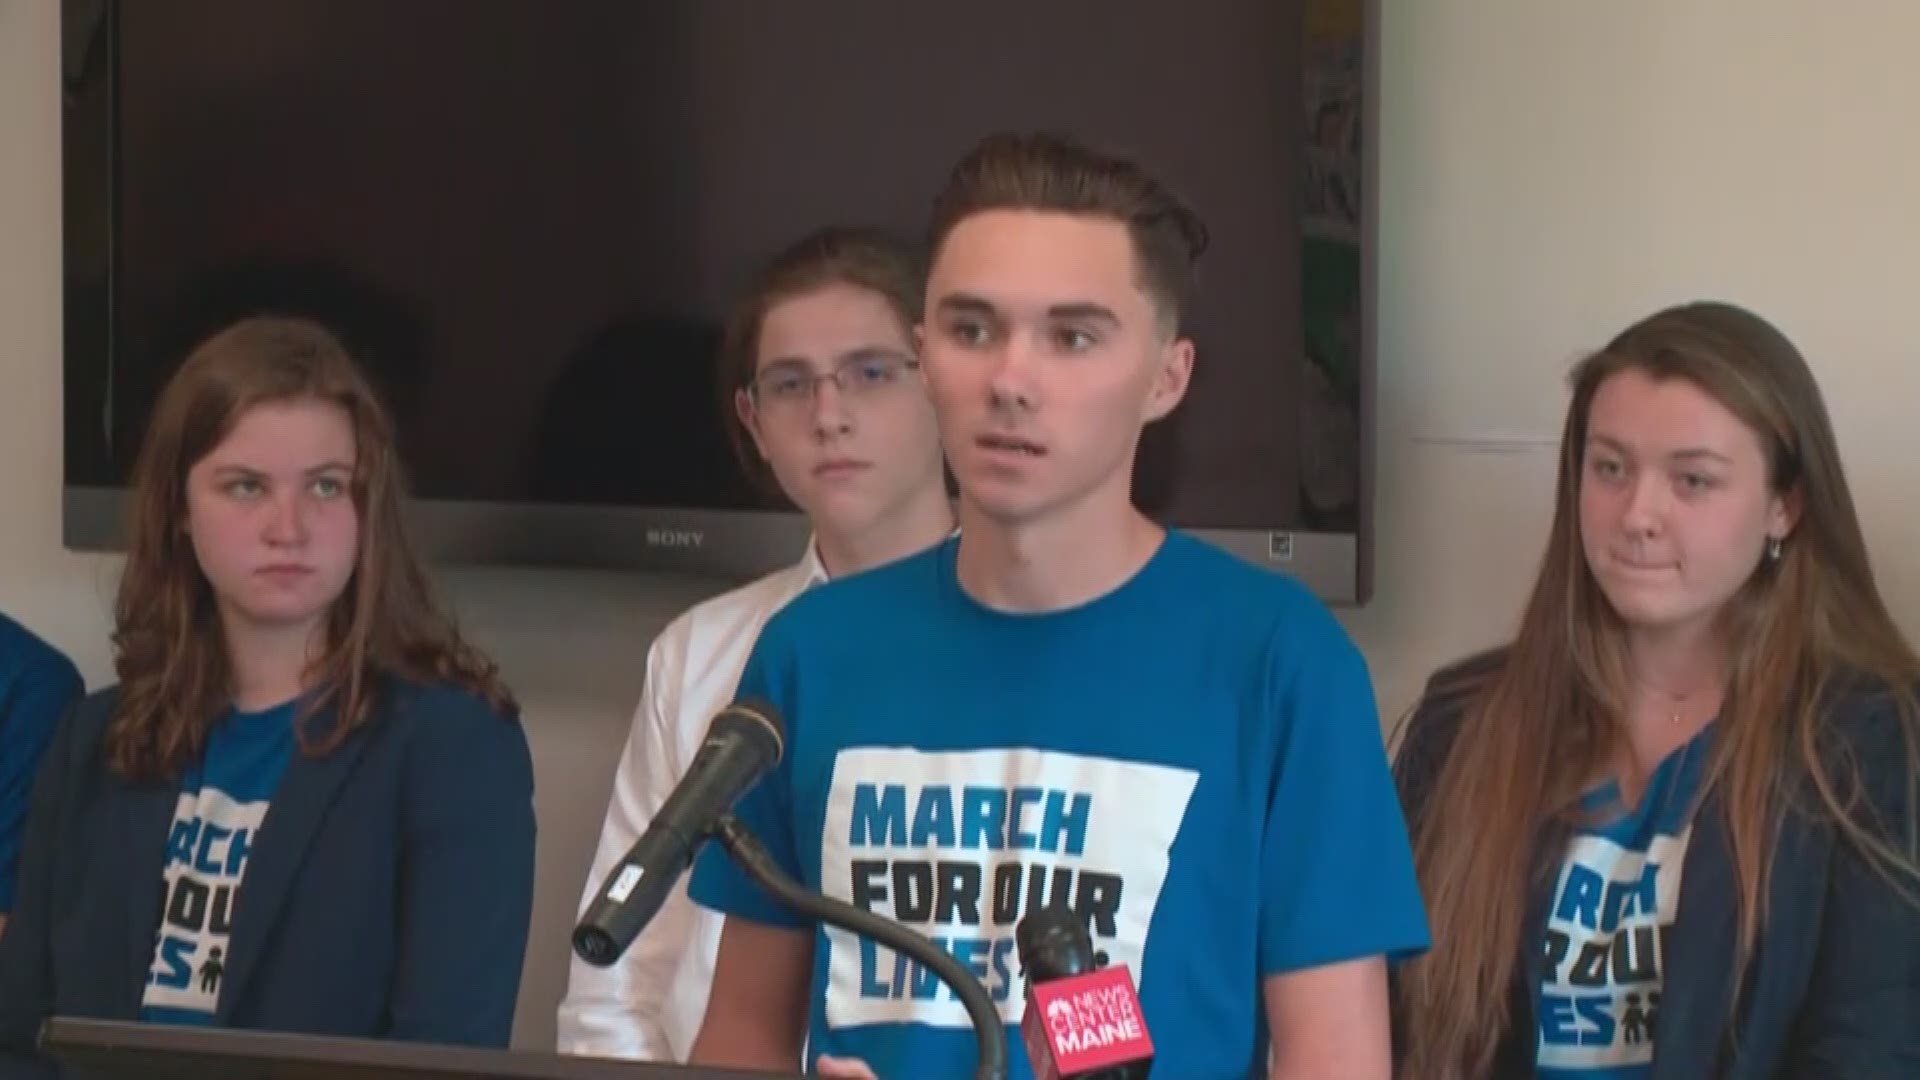 David Hogg, co-founder of nationwide student activist movement March For Our Lives, is in Maine to discuss ways to pass gun reform and 'Red Flag' laws.